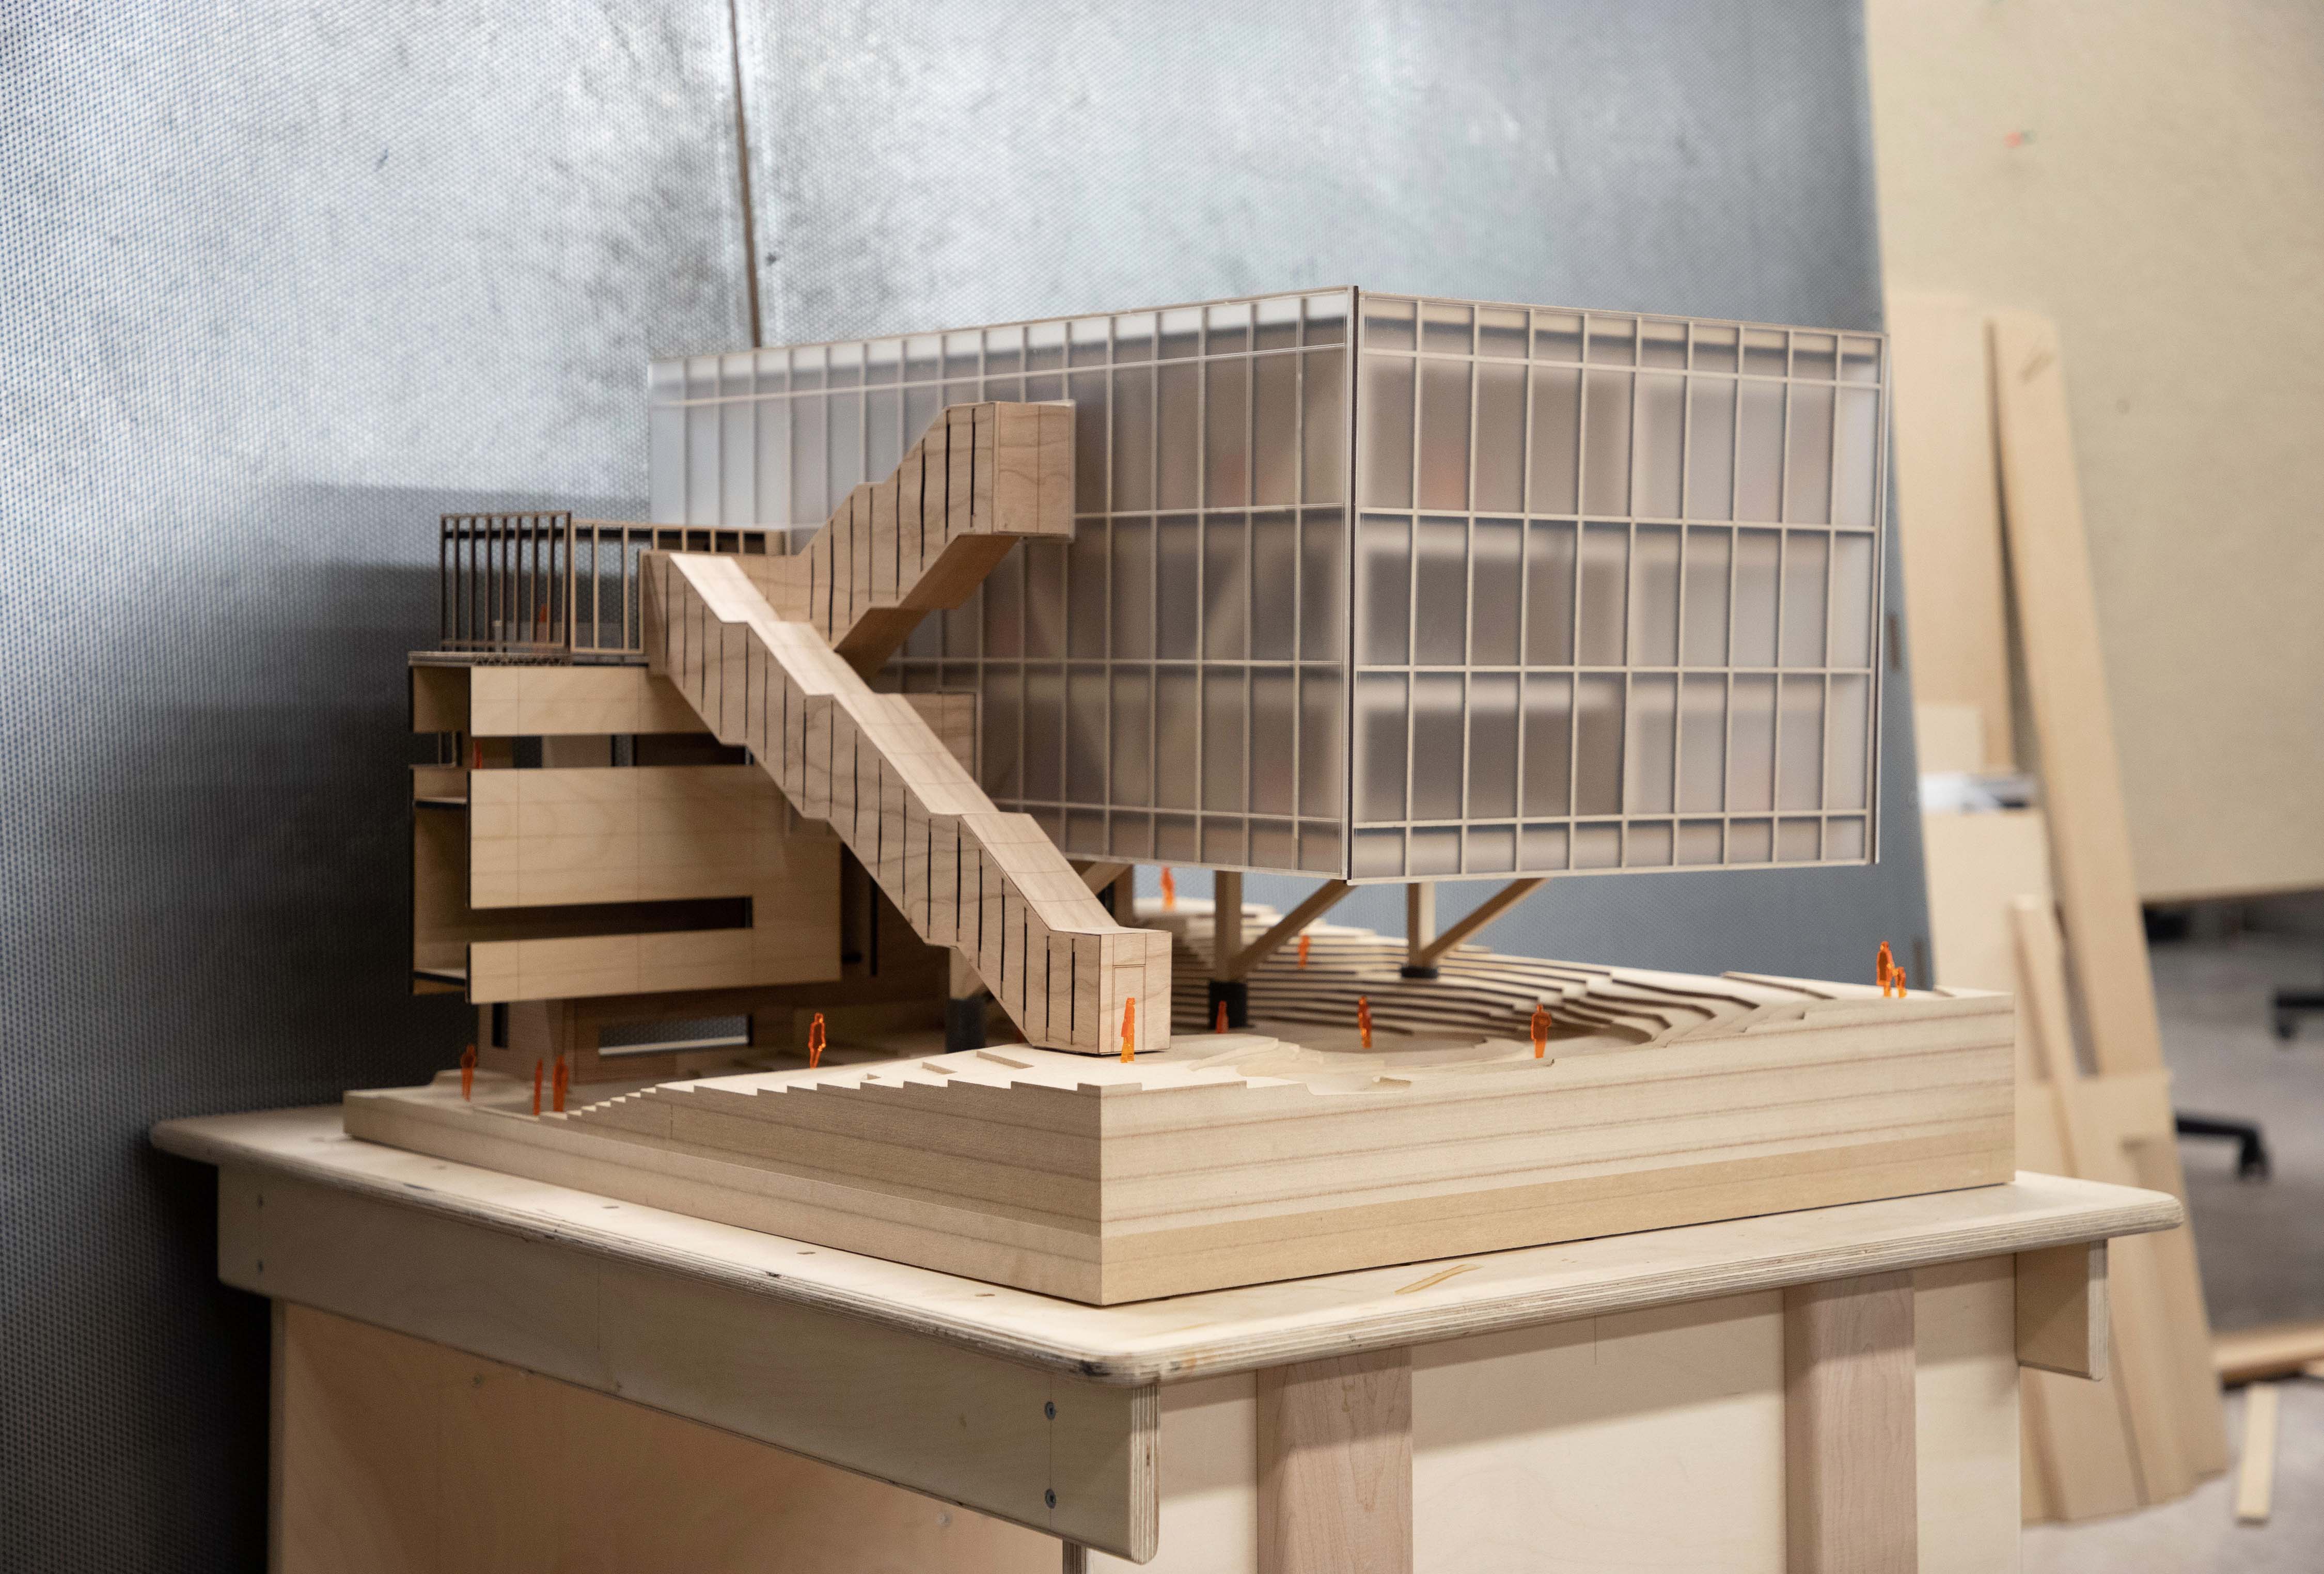 Model of the Bloordale Collegiate Institute by Thomas Hristov and Jake Kroft